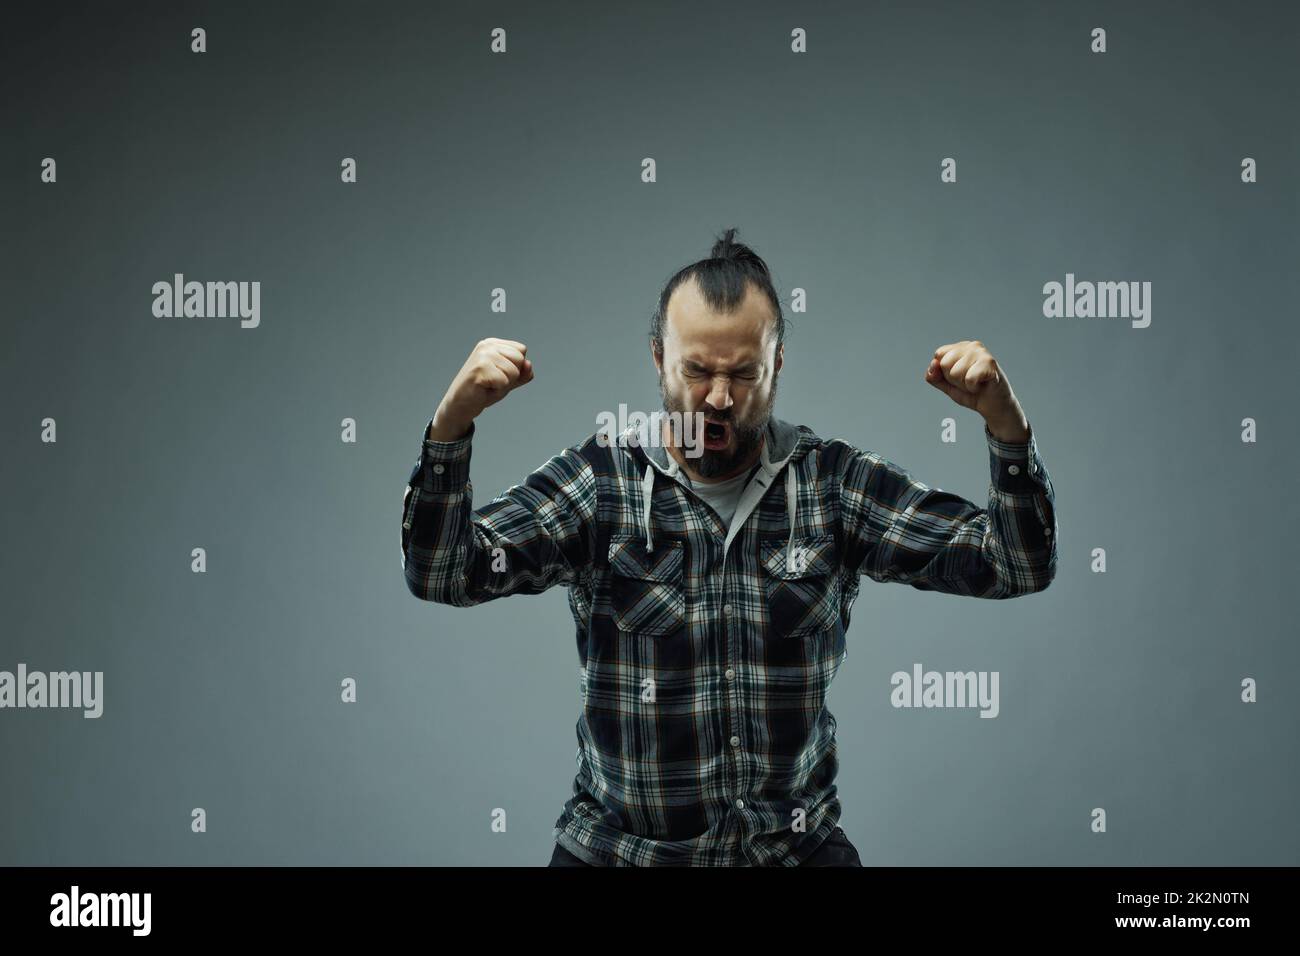 Man in check shirt raising hands in triumph Stock Photo